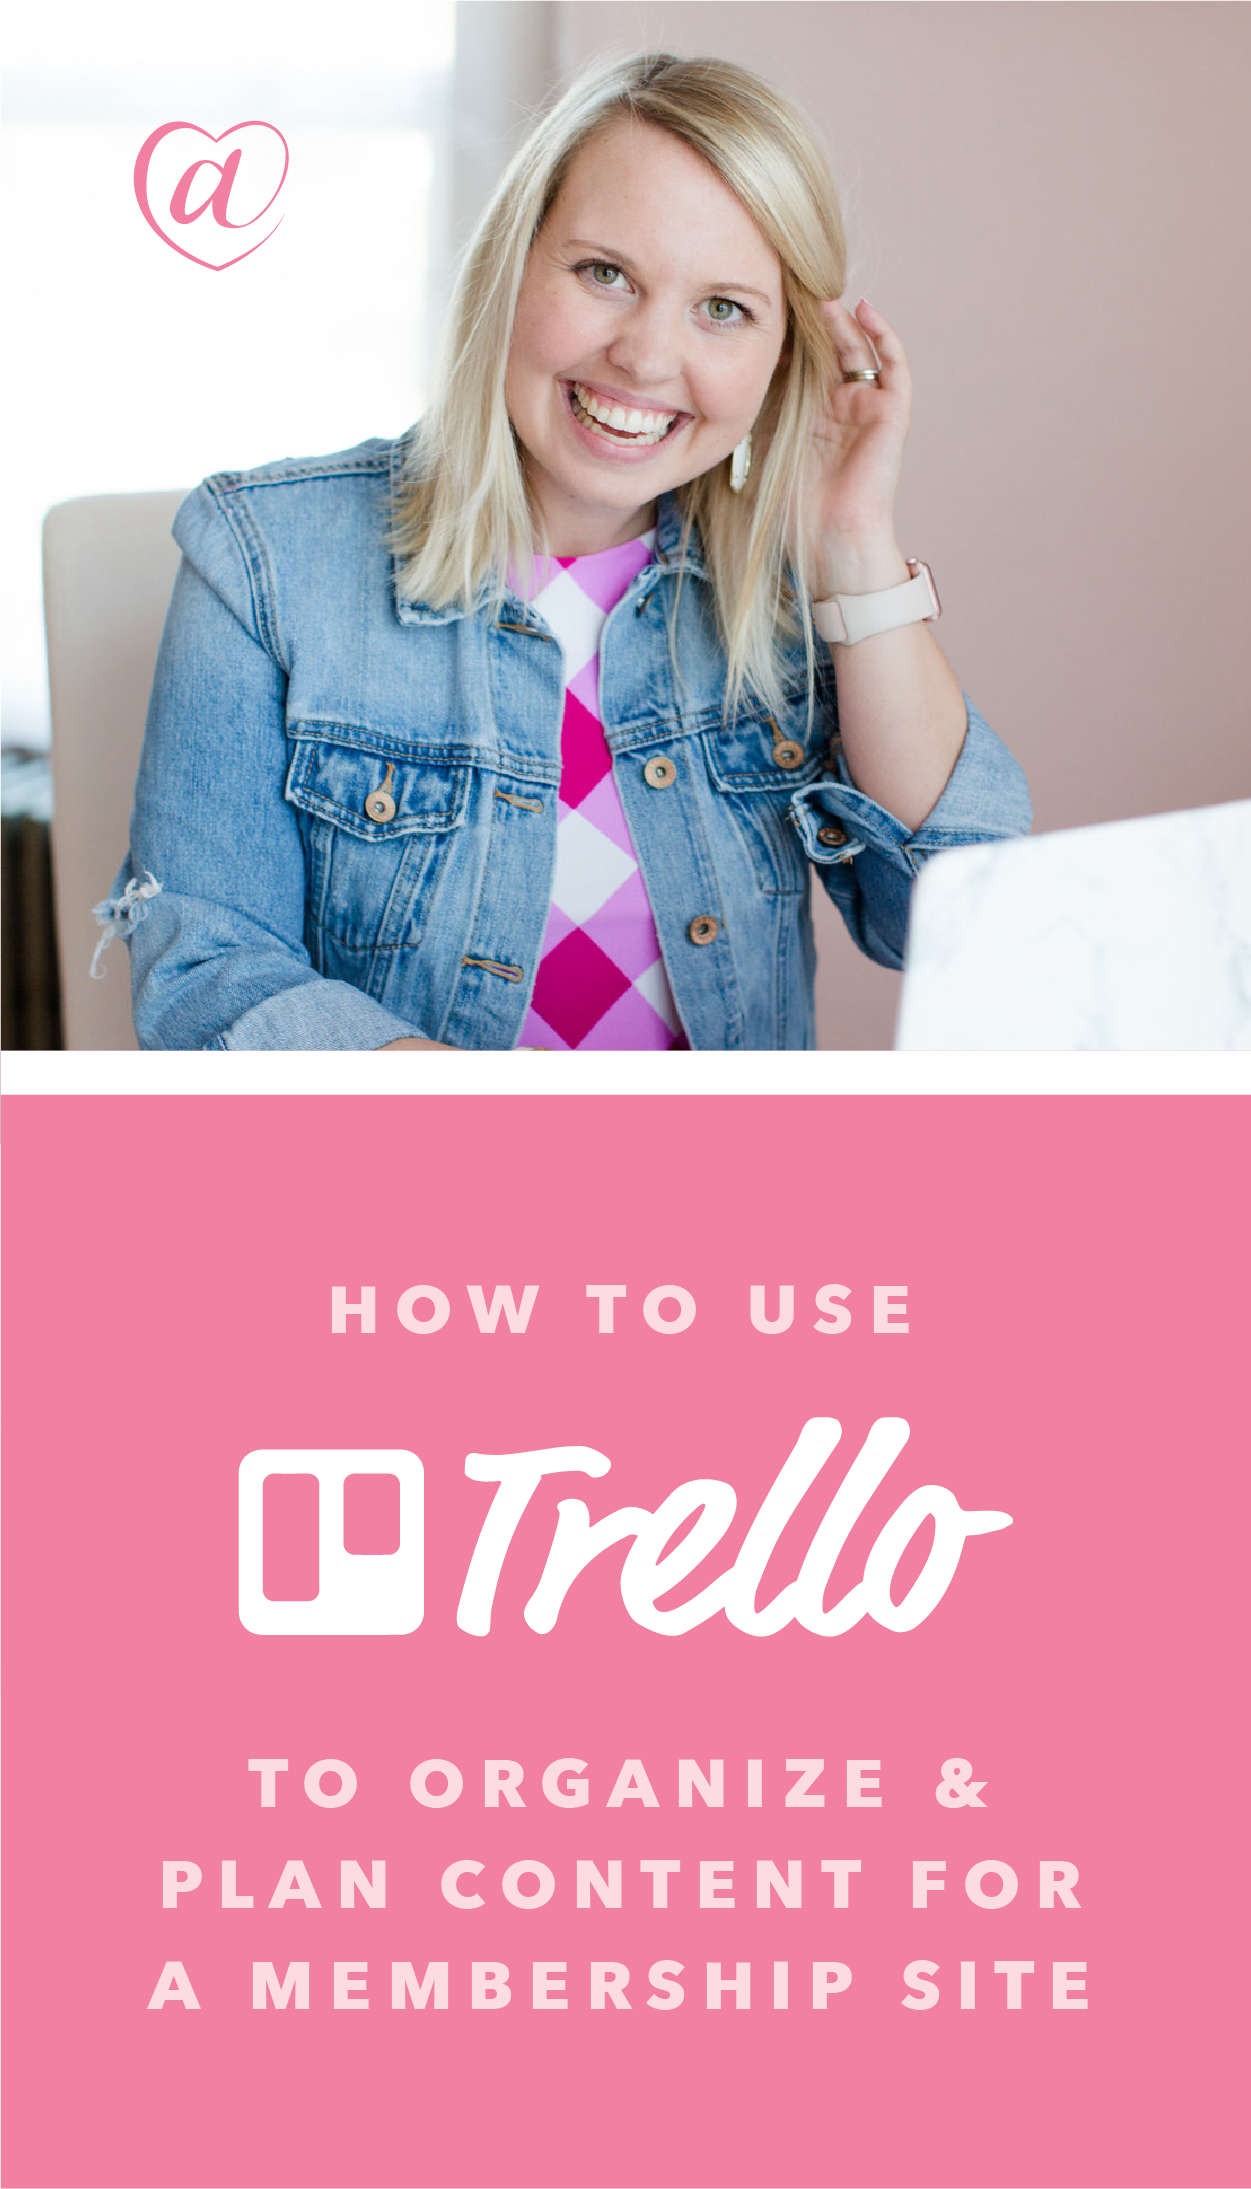 How I Organize + Plan Content for a Membership Site  // Creative at Heart #membershipsite #creative247 #trello #organizecontent #digitalproduct #passiveincome